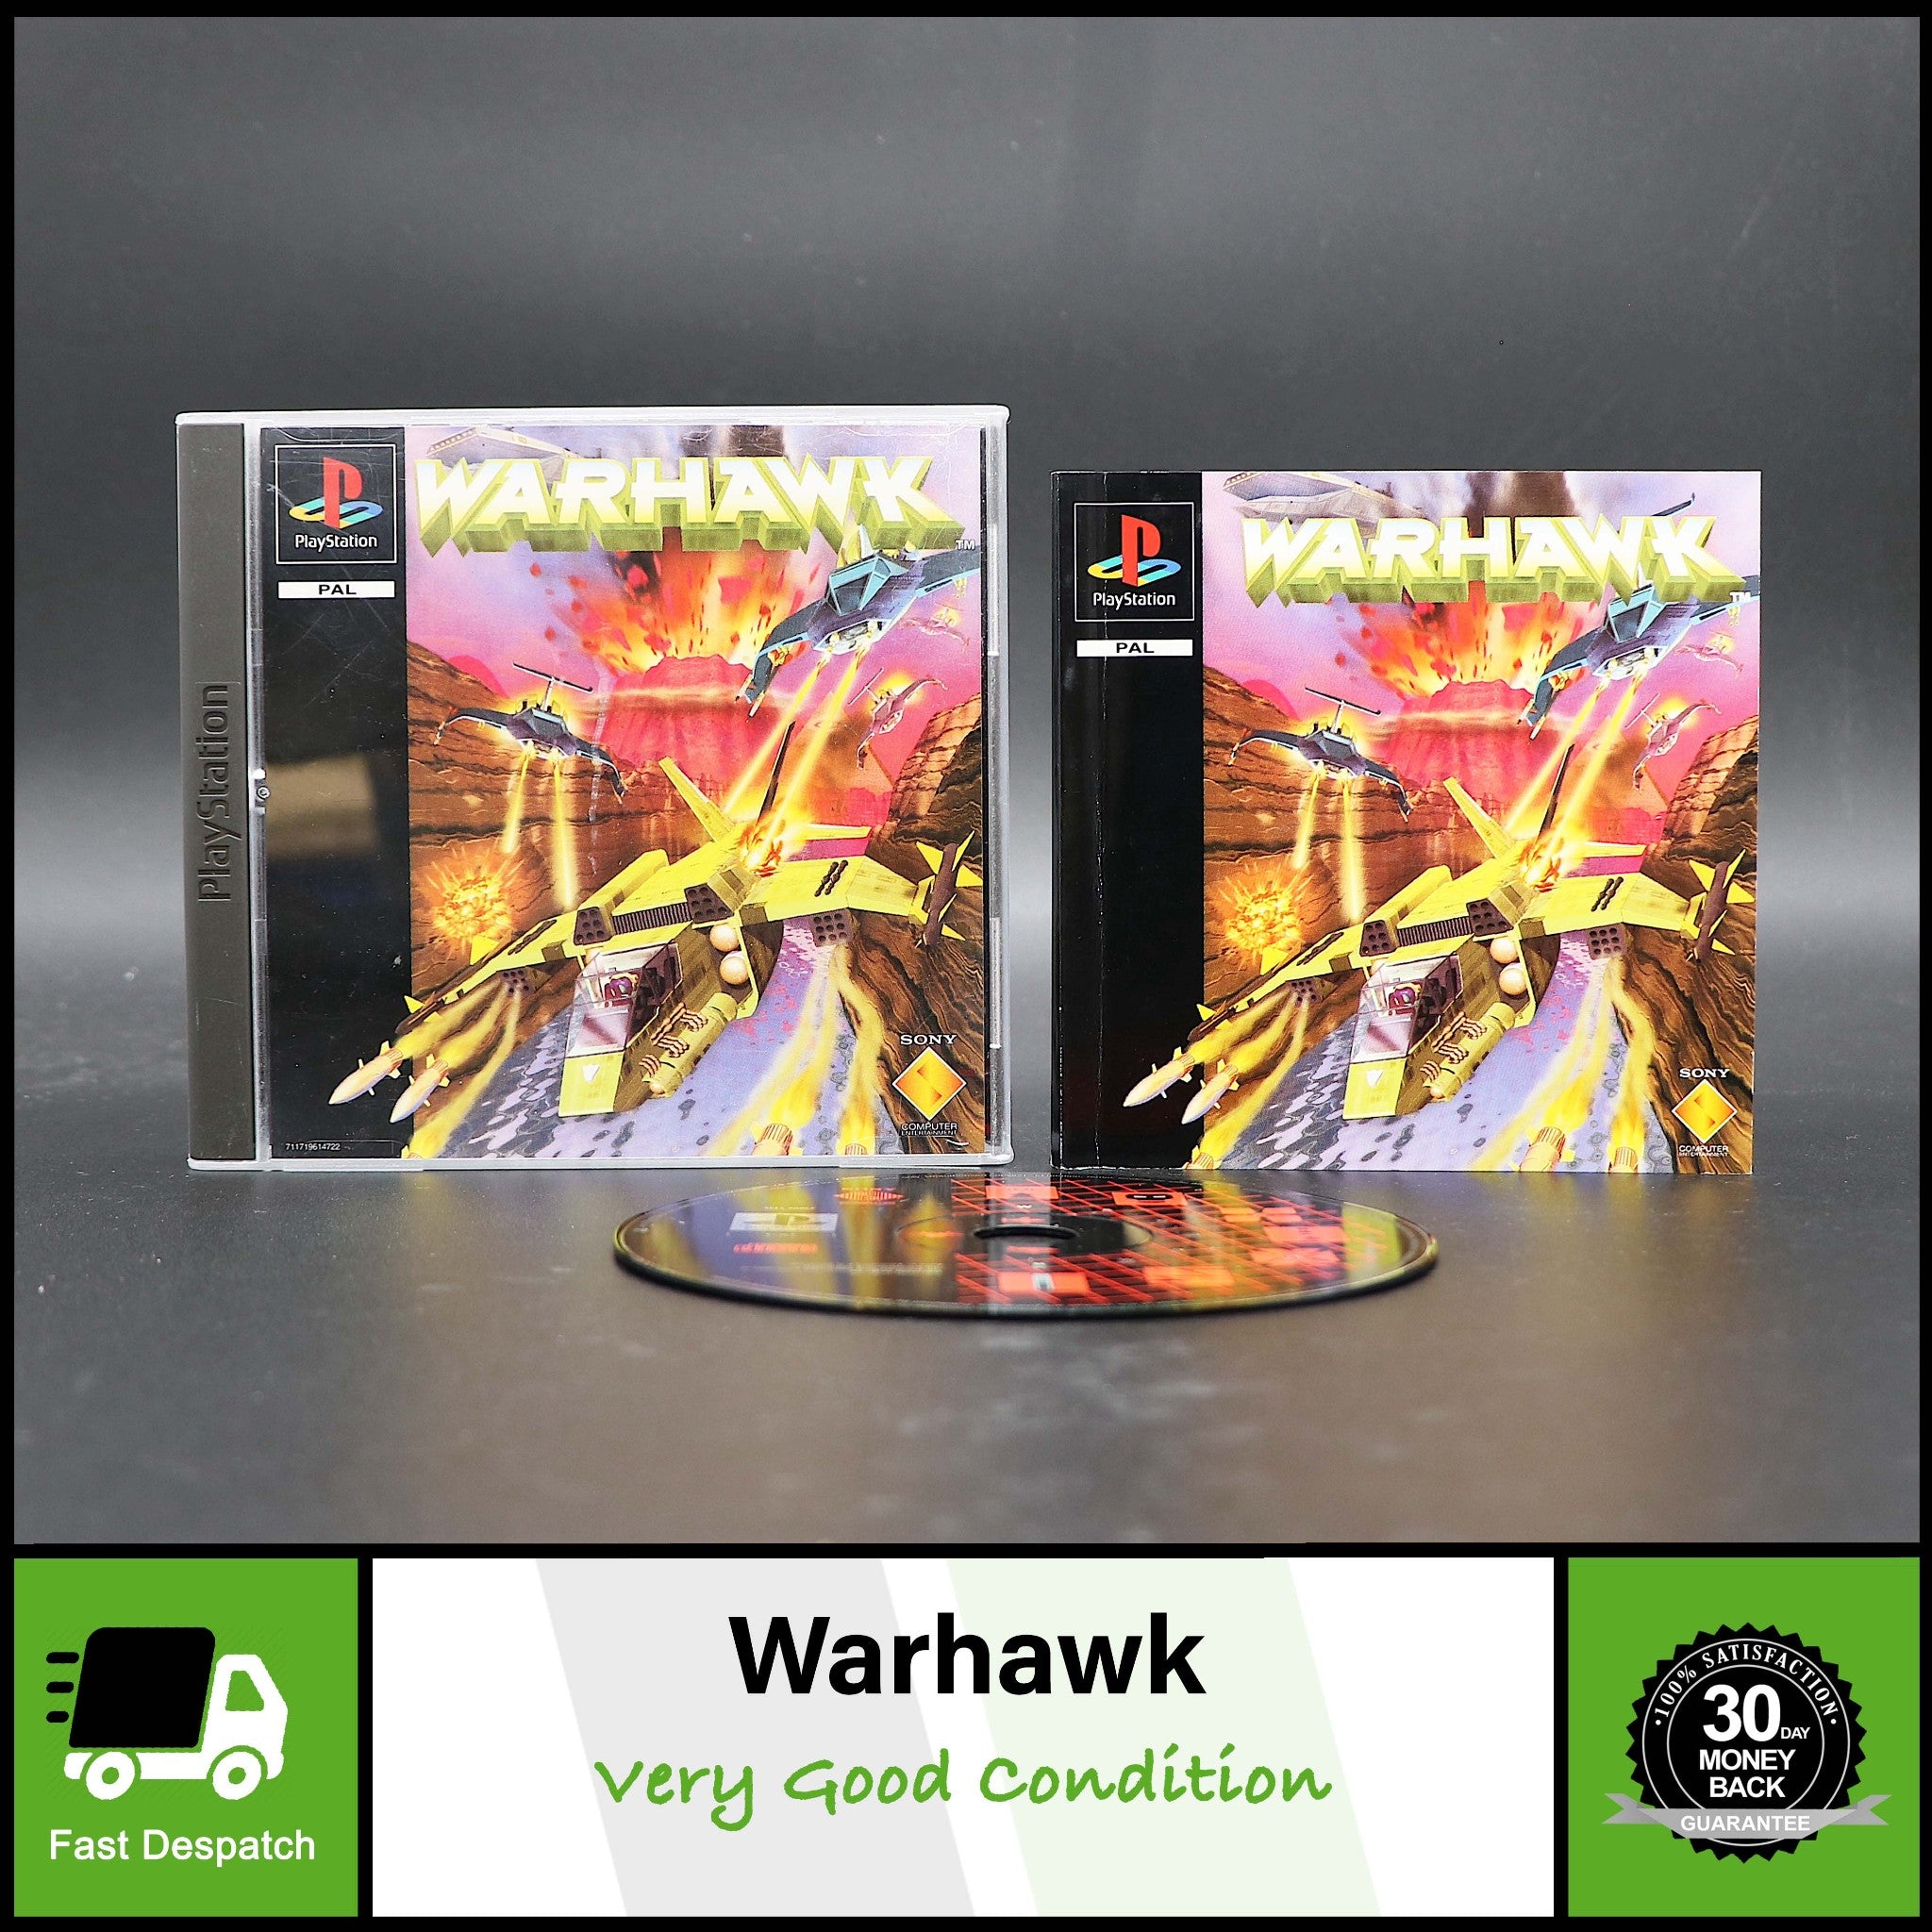 Warhawk | Sony PS1 Playstation PSOne Game | Very Good Condition